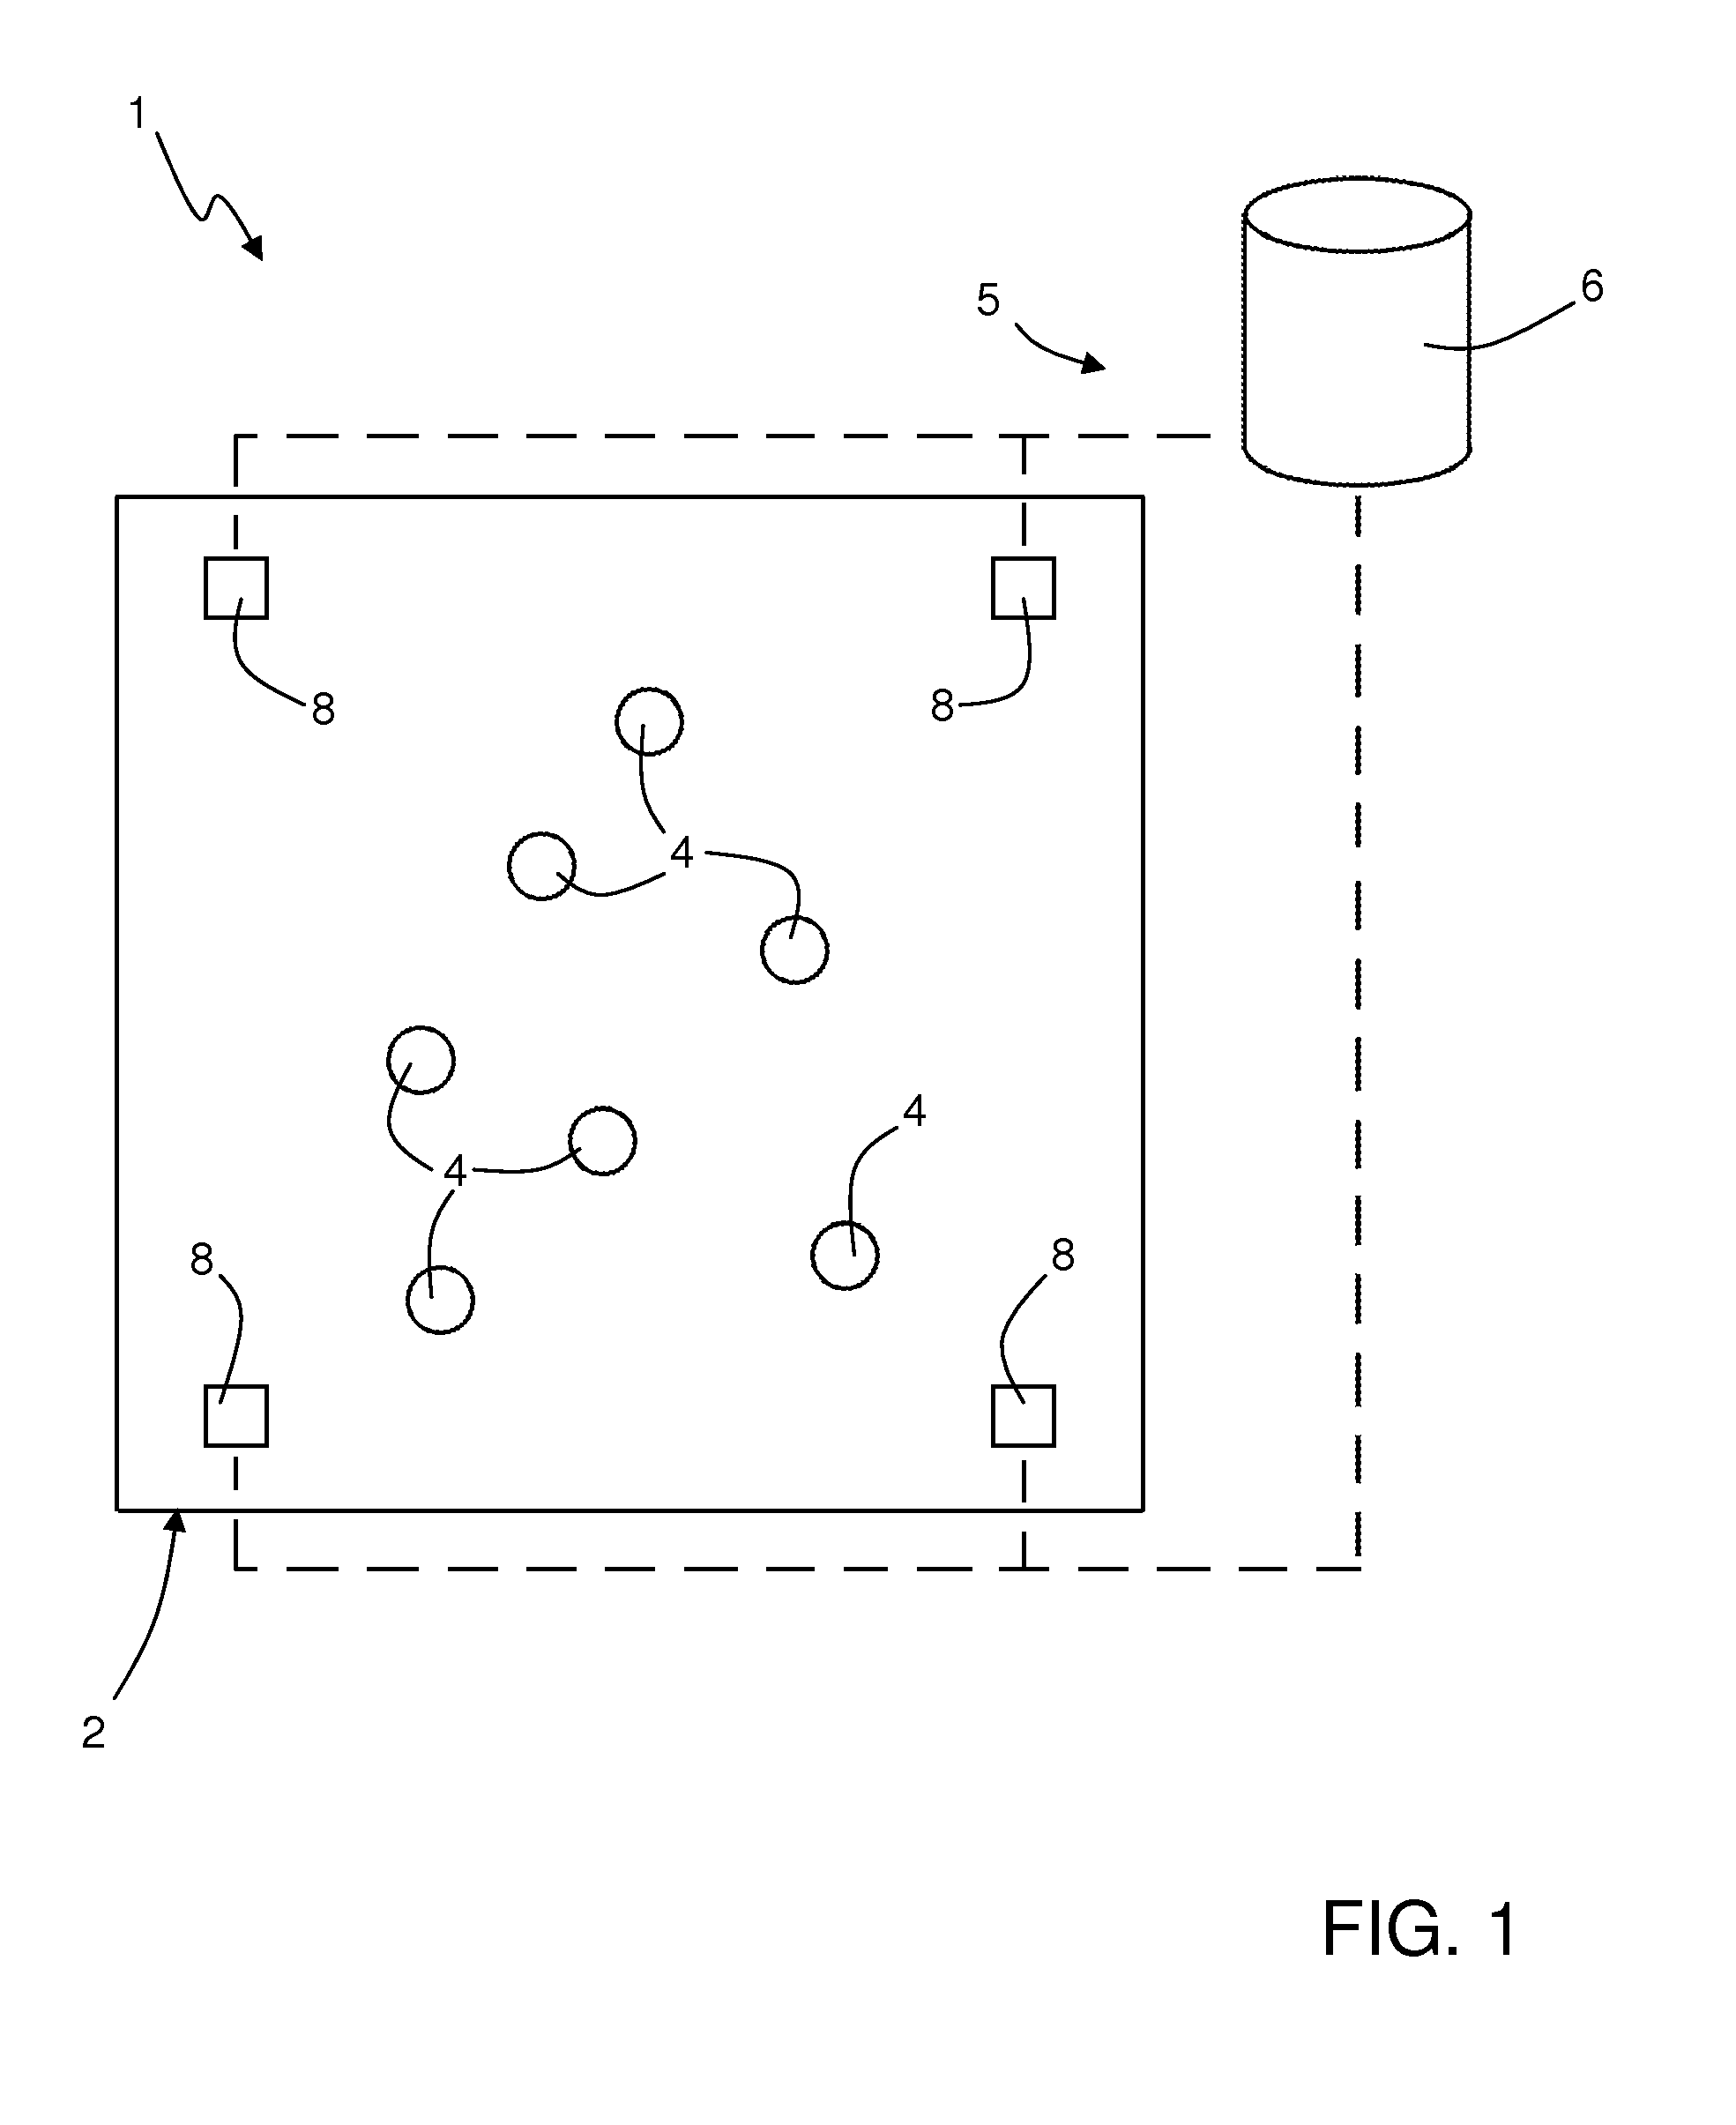 Wireless hardware device for detecting relations of distance, and system for monitoring relations of distance between wireless hardware devices